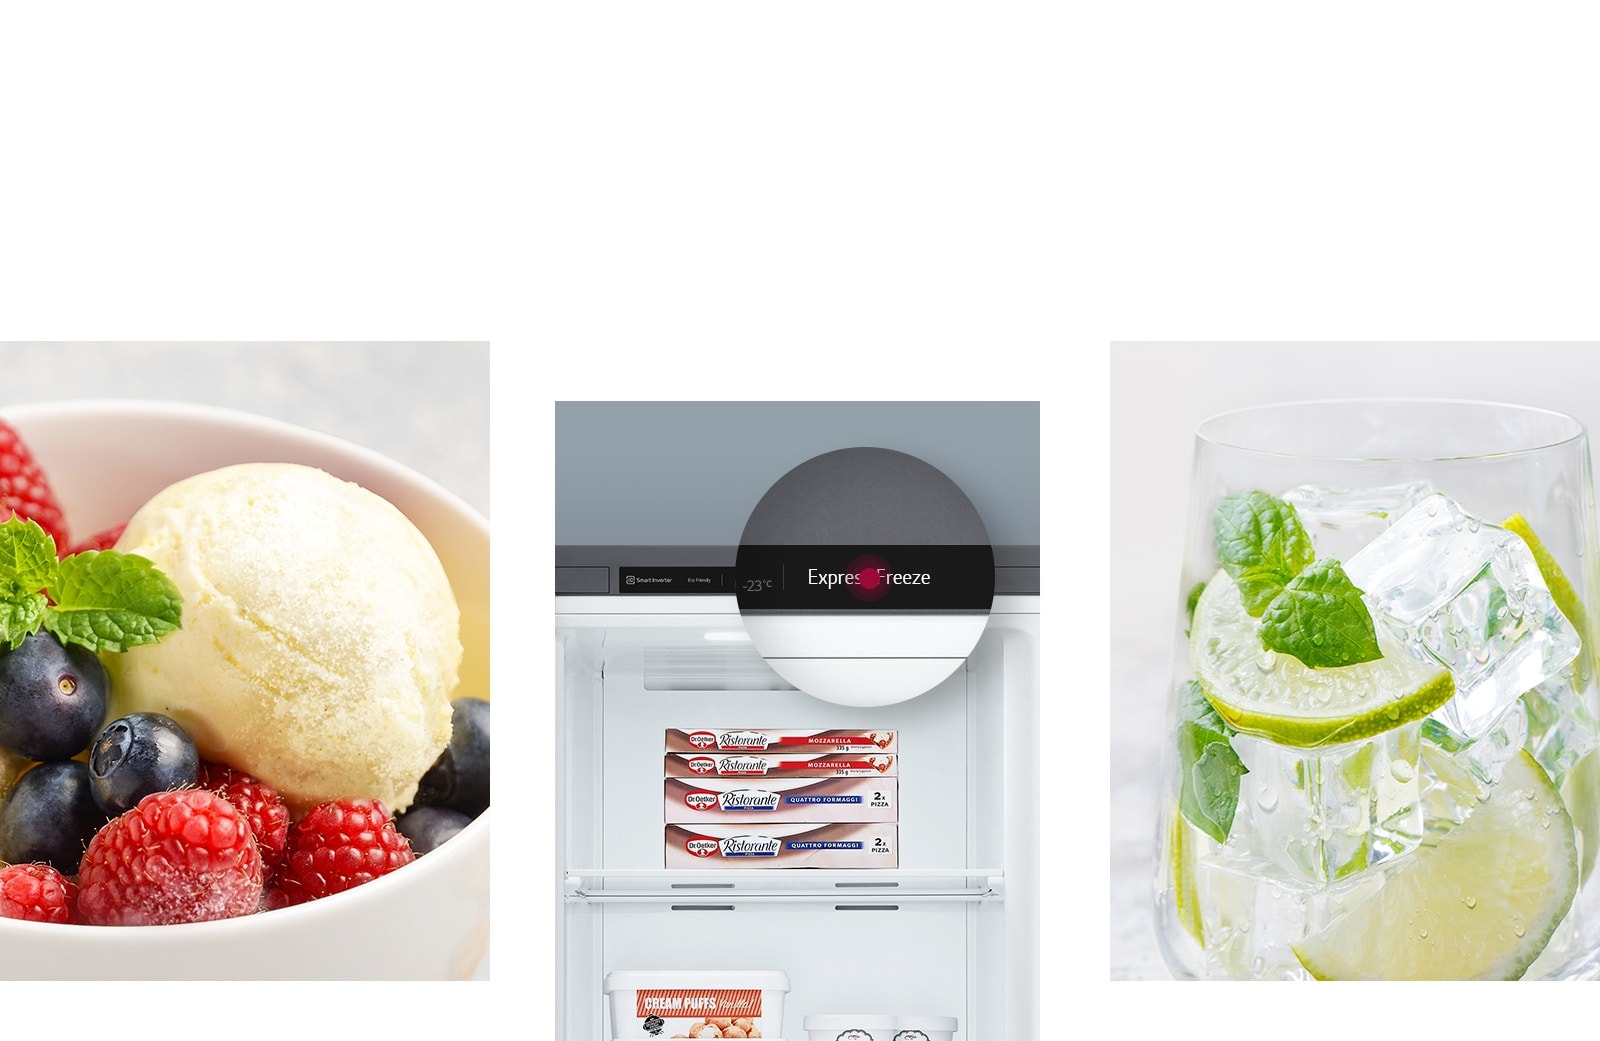 One image shows a bowl of icecream with a fruit topping. A second image shows the interior of the freezer stocked with ice cream and a magnification bubble showing the "Express Freeze" button. A third image shows a drink with a lot of ice.